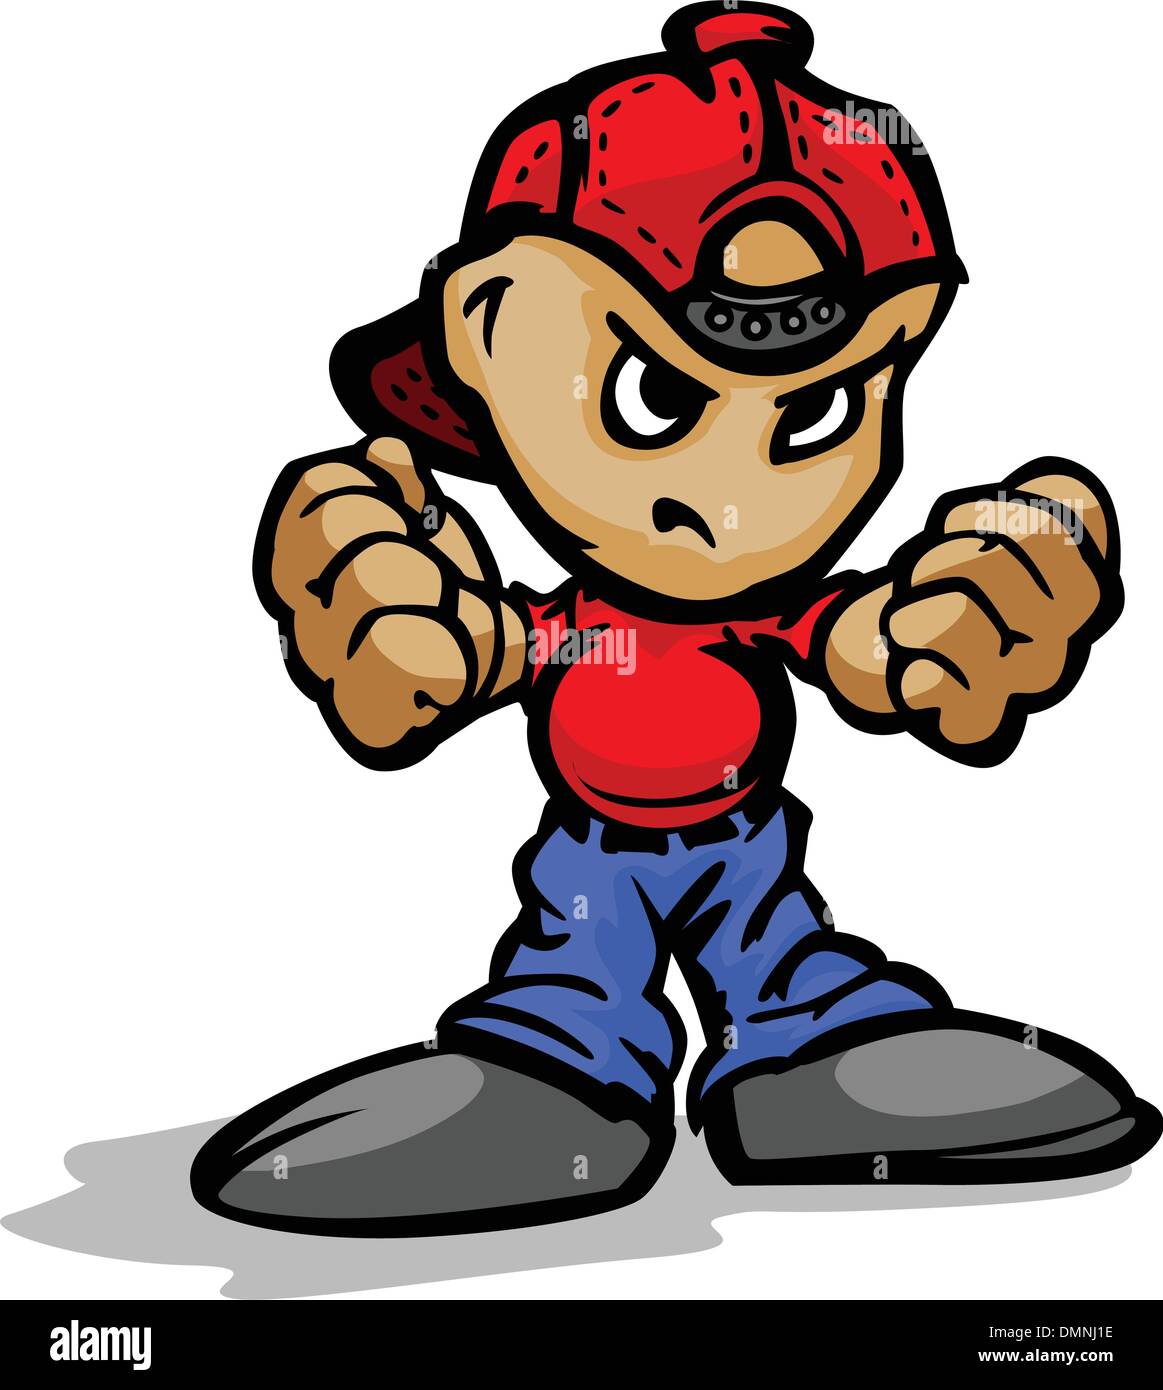 Punk Kid with Ball Cap on Backwards showing Fists Vector Cartoon Stock Vector